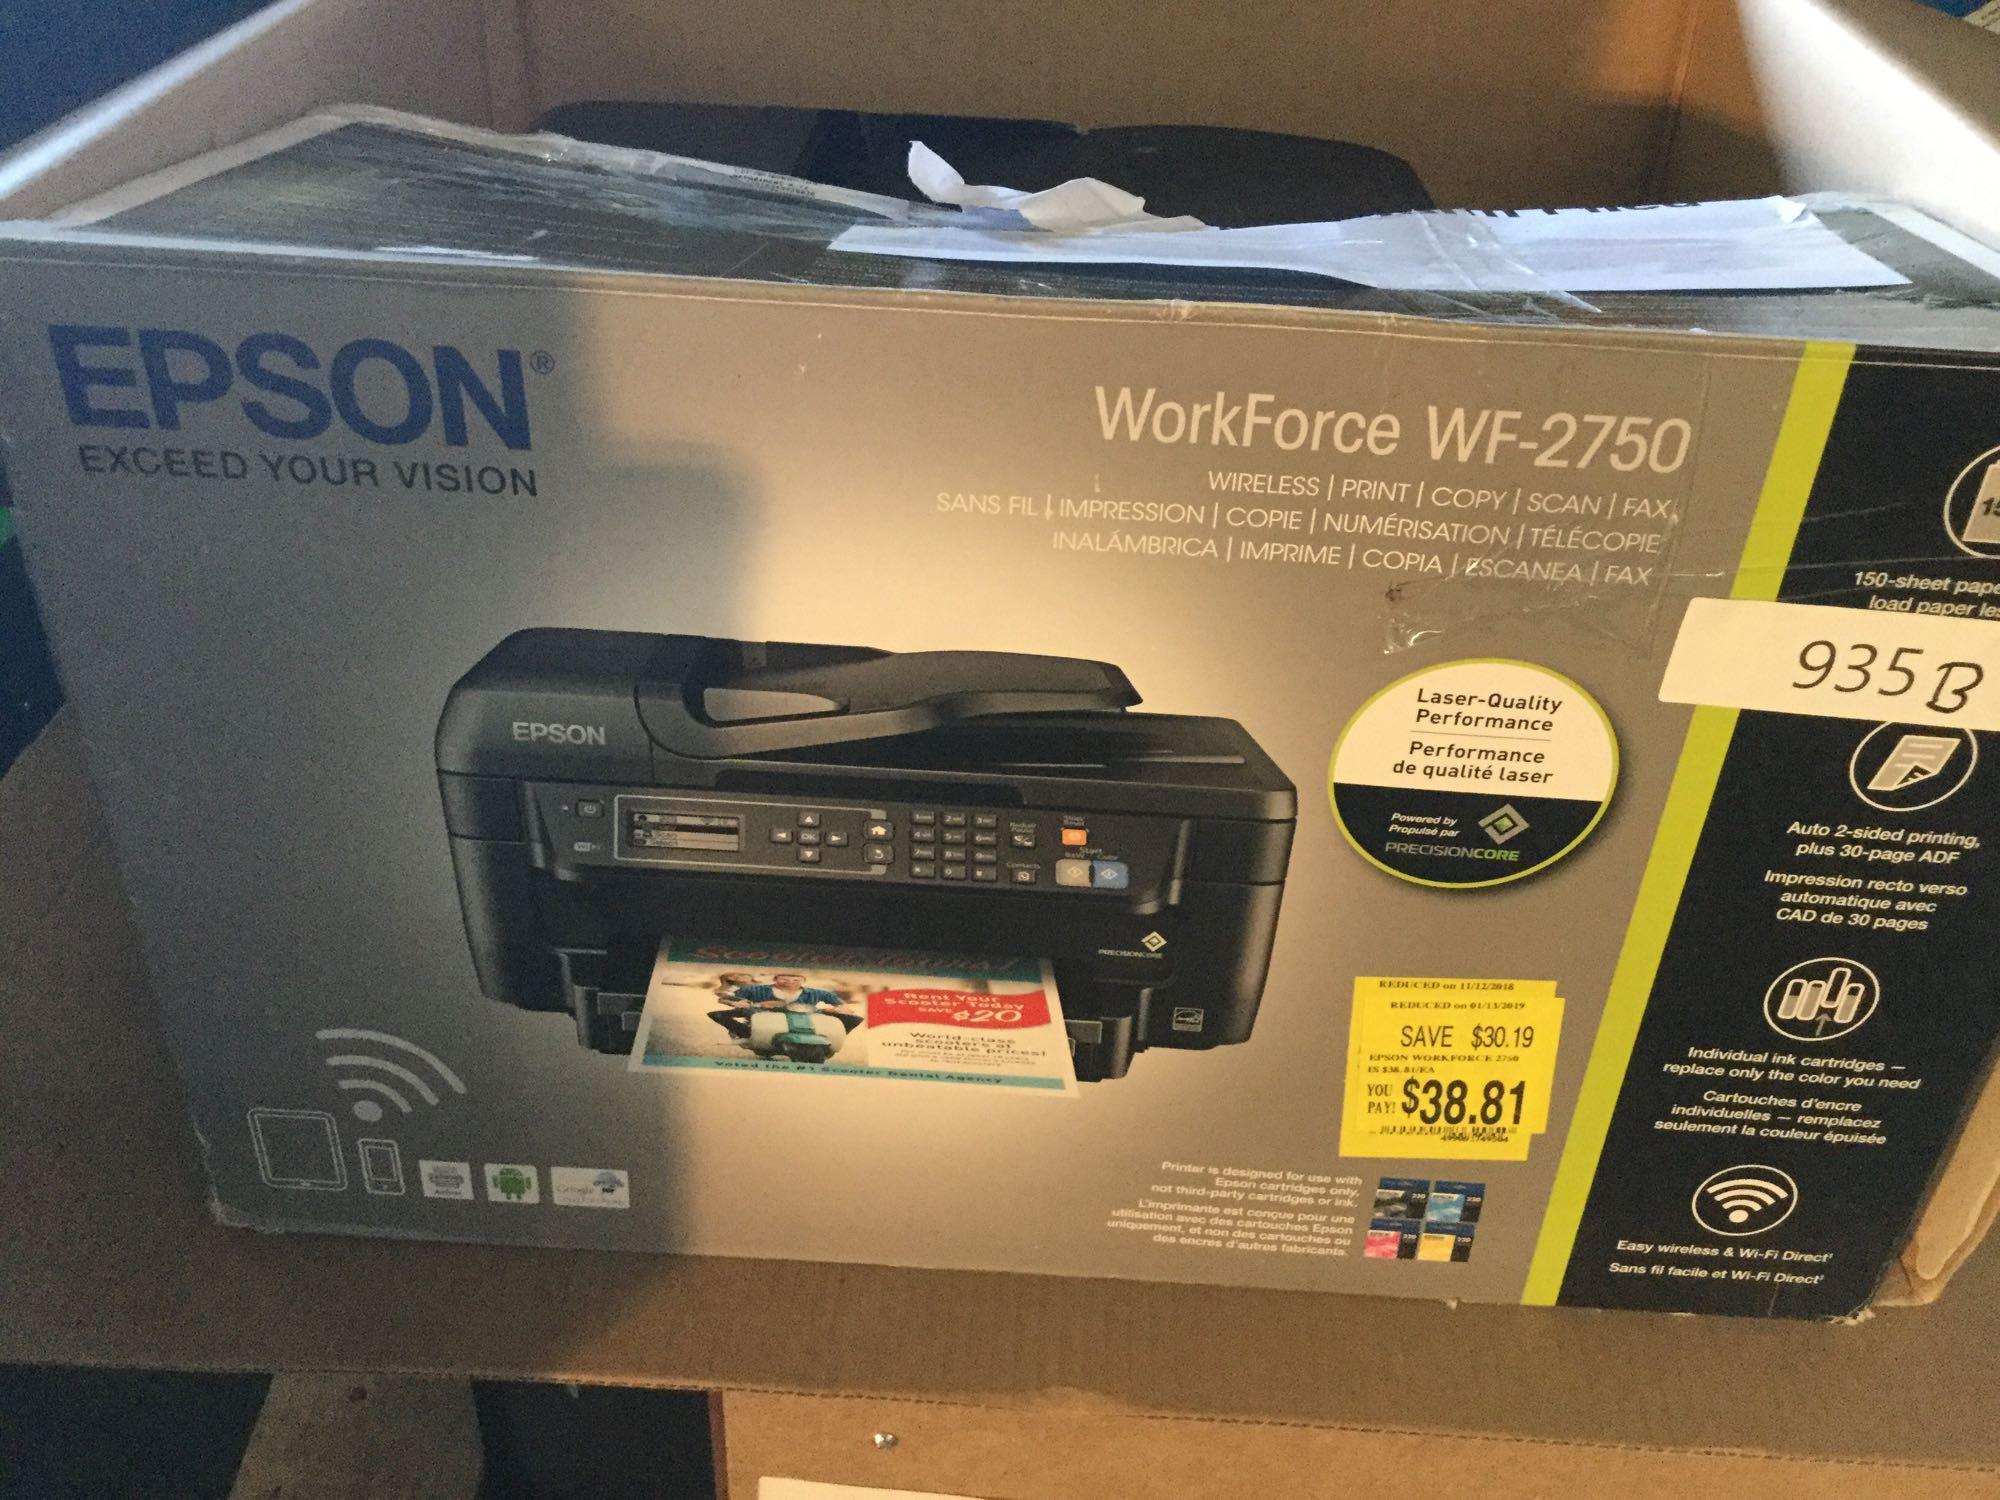 Epson WF-2750 All-in-One Wireless Color Printer - $79.00 MSRP